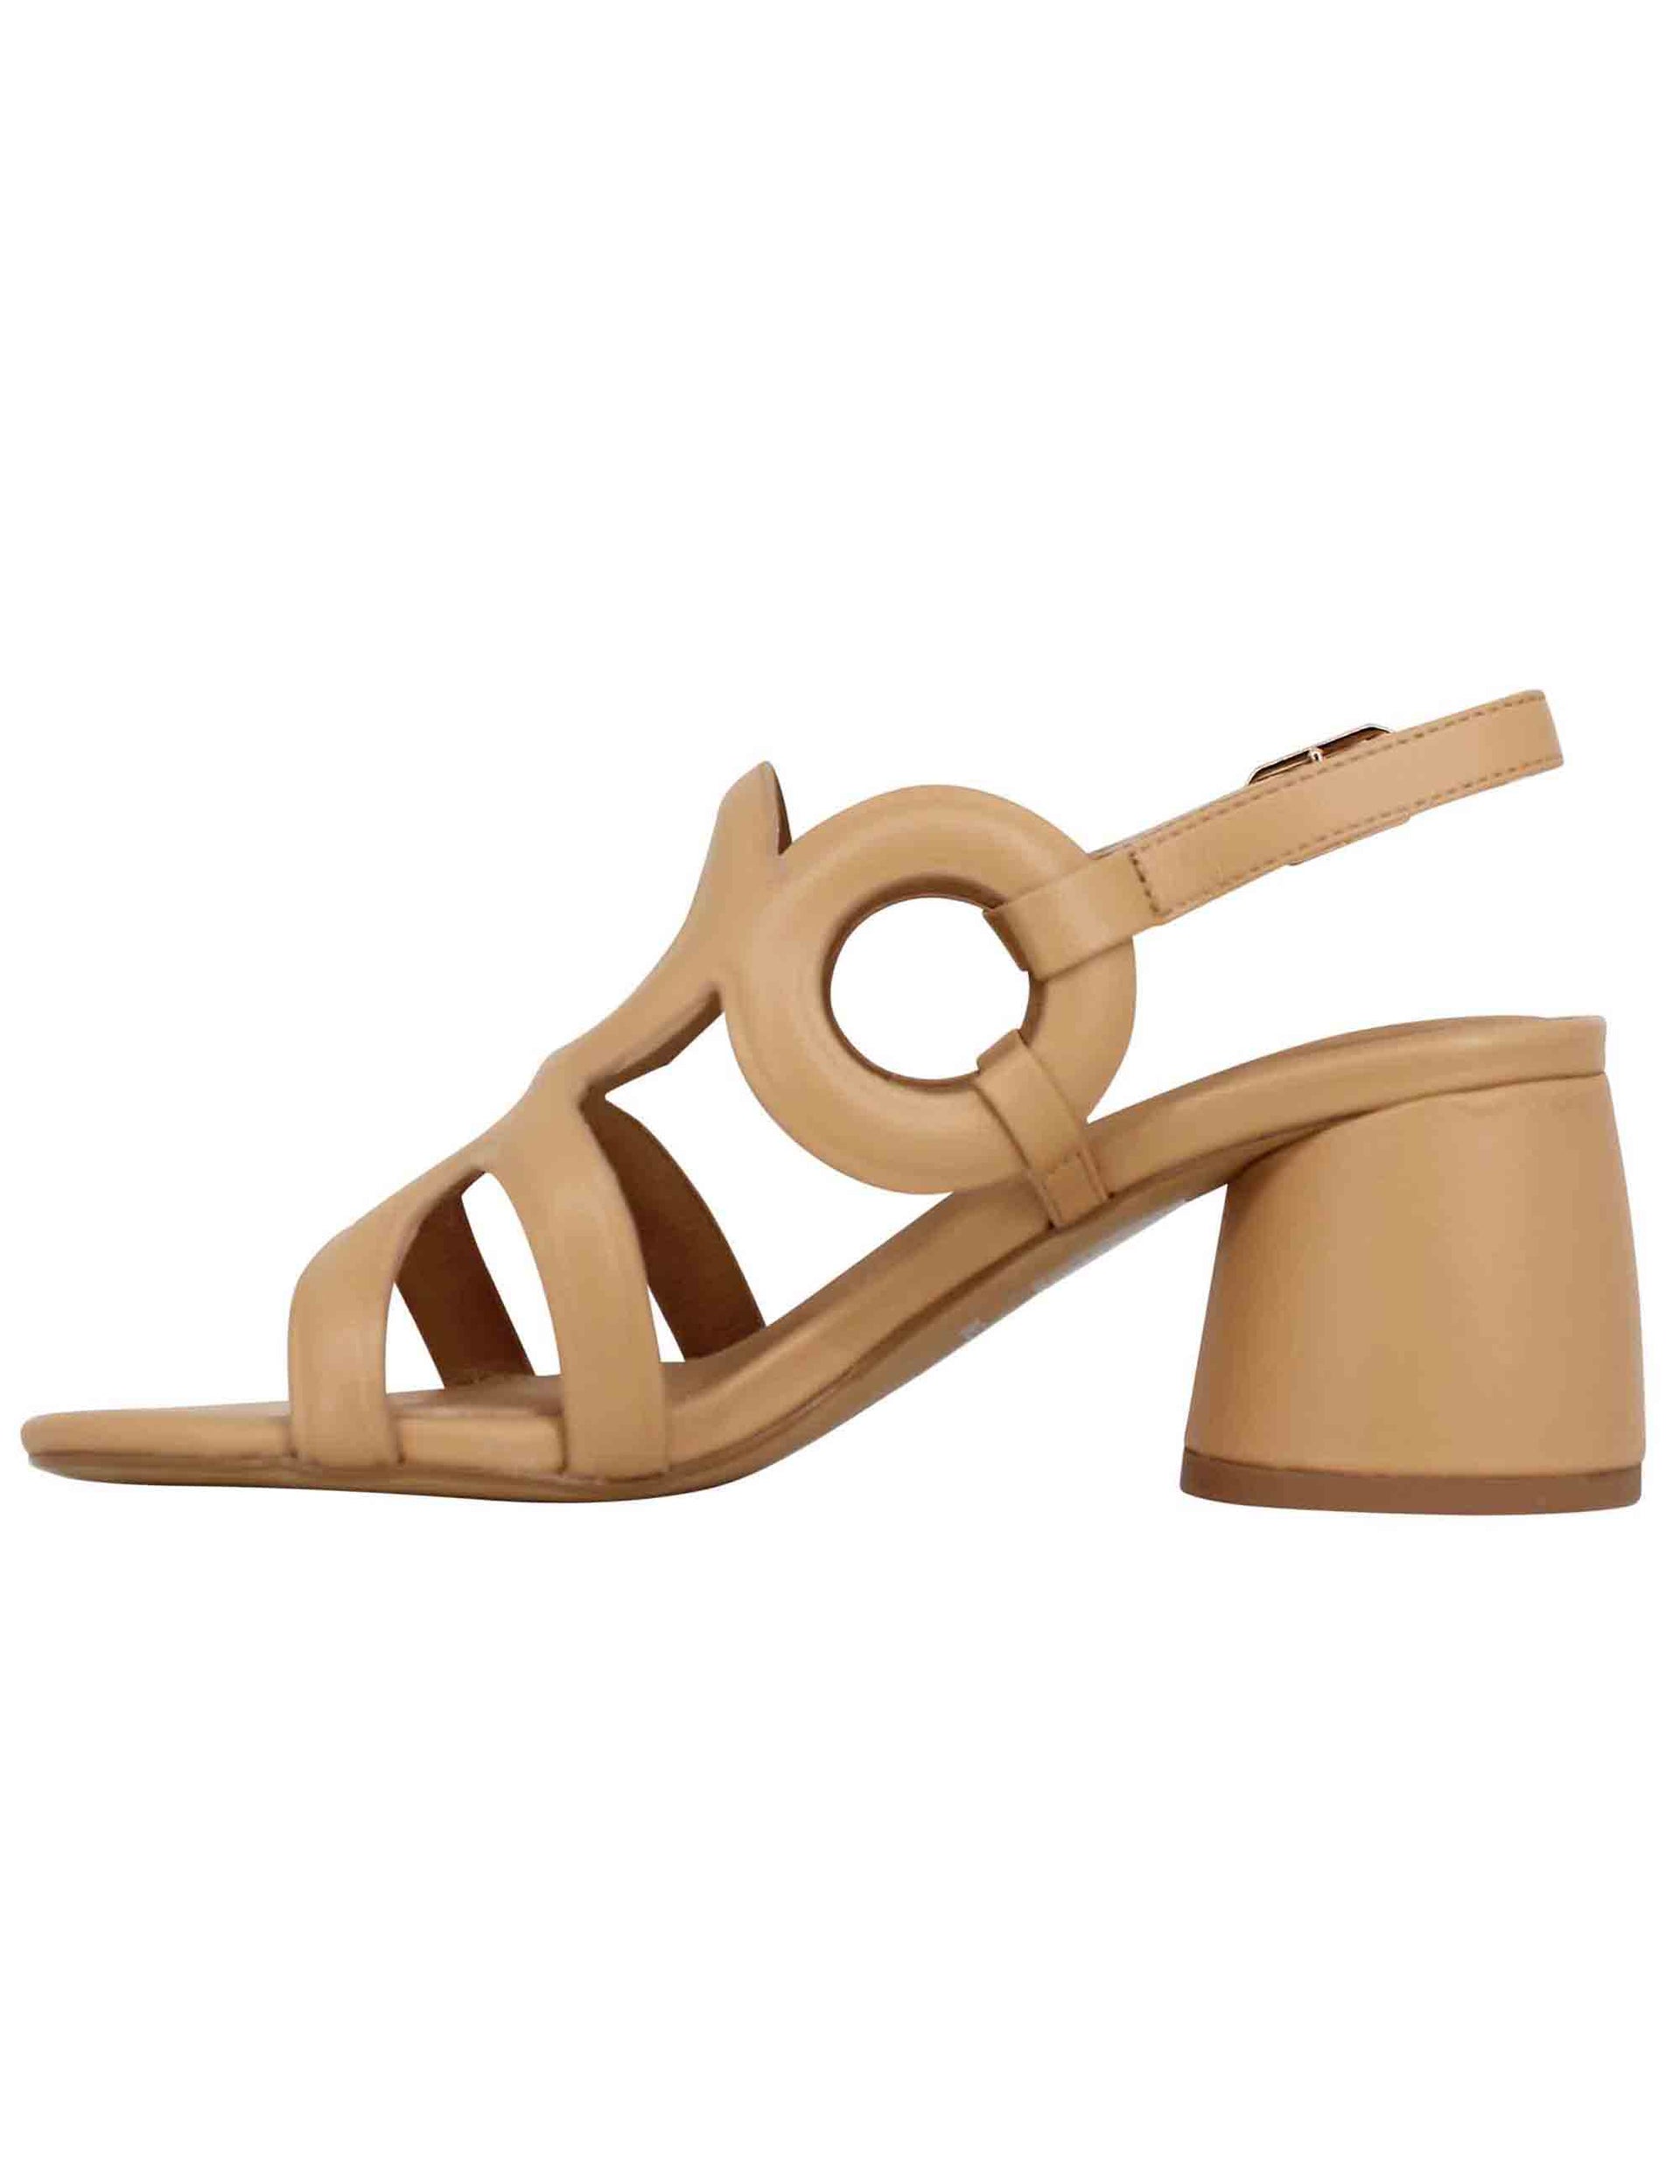 Women's slingback sandals in tan leather with round toe